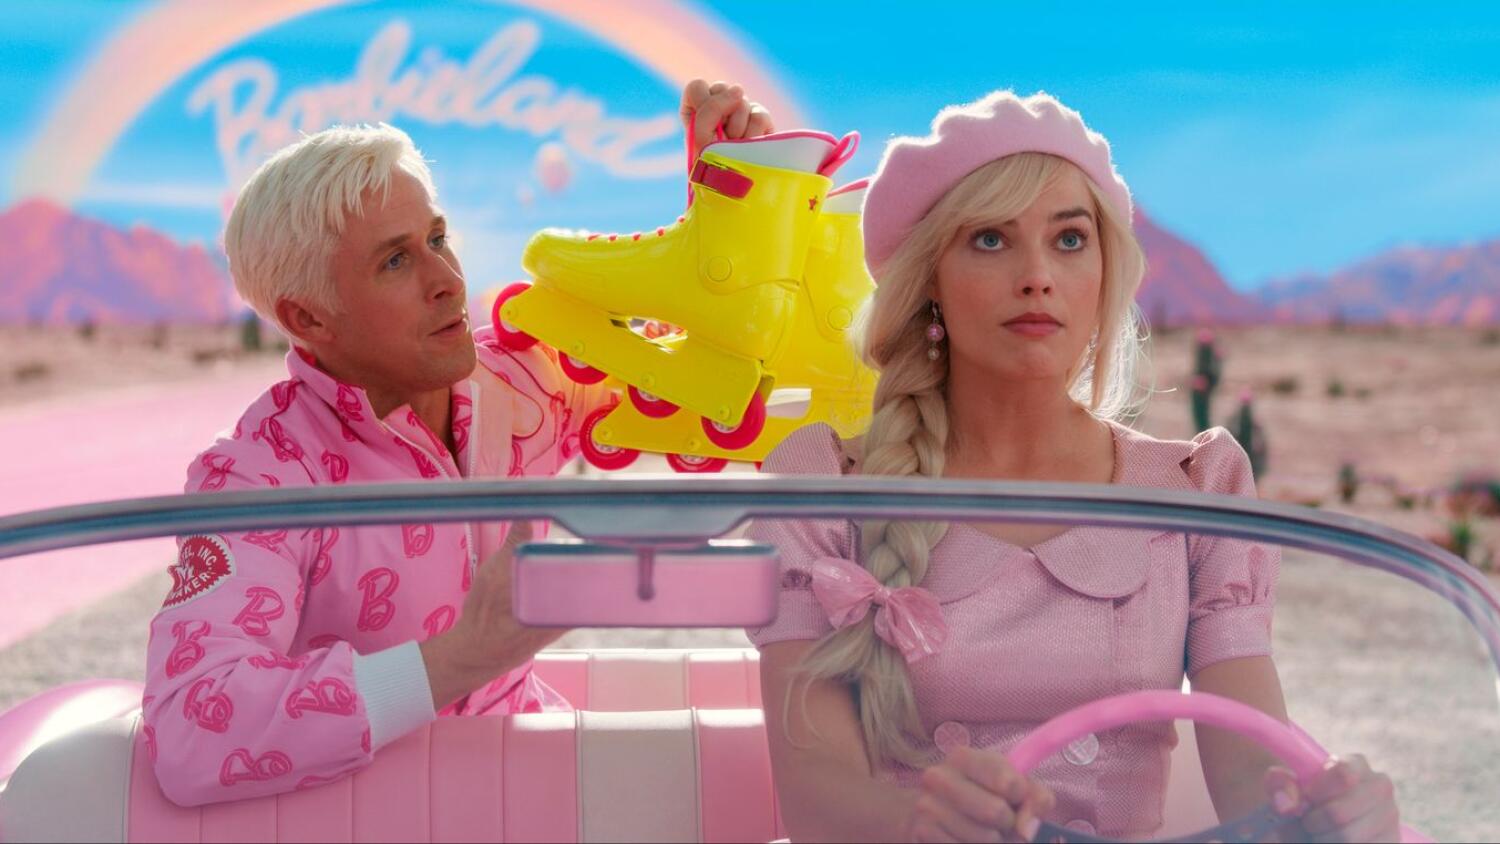 This mage released by Warner Bros. Pictures showsRyan Gosling, left, and Margot Robbie in a scene from 'Barbie.' (Warner Bros. Pictures via AP)